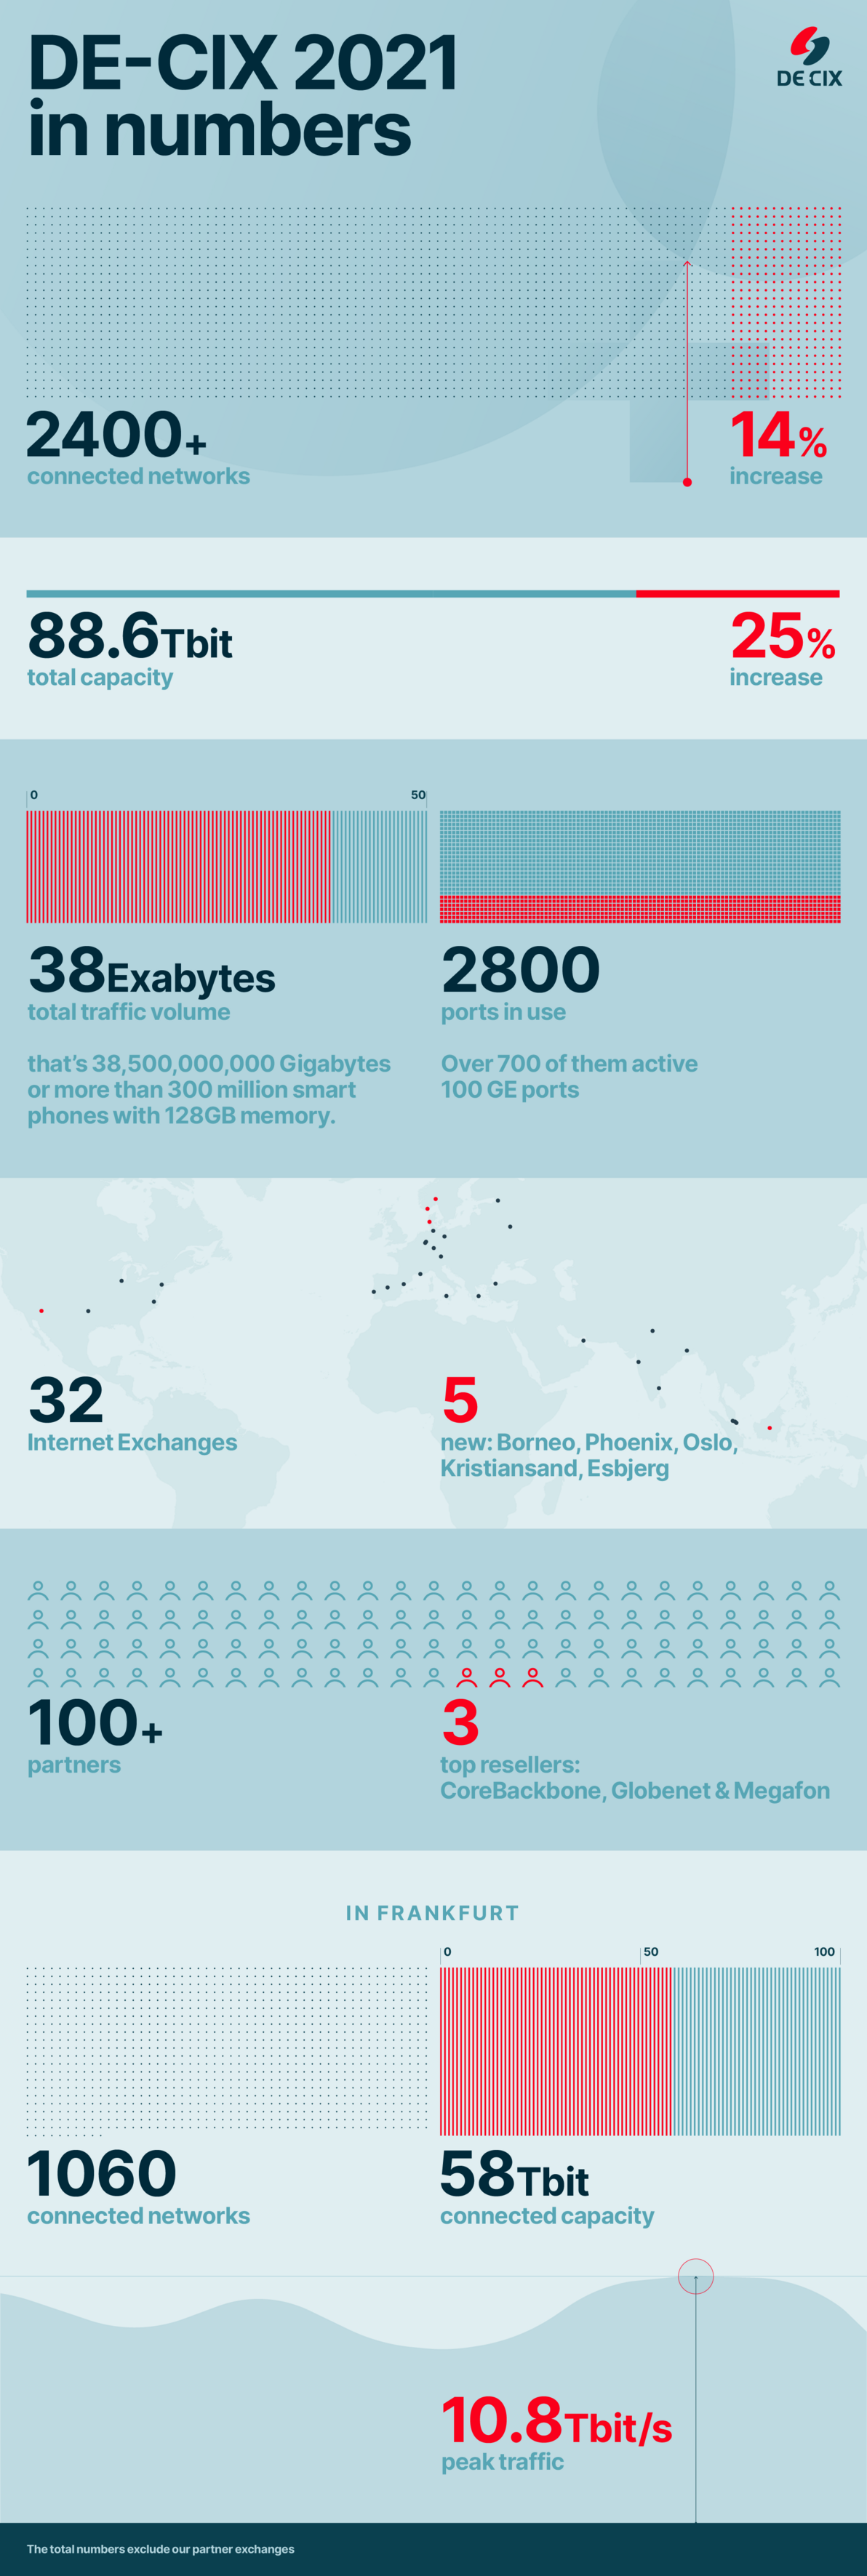 2021 in numbers infographic